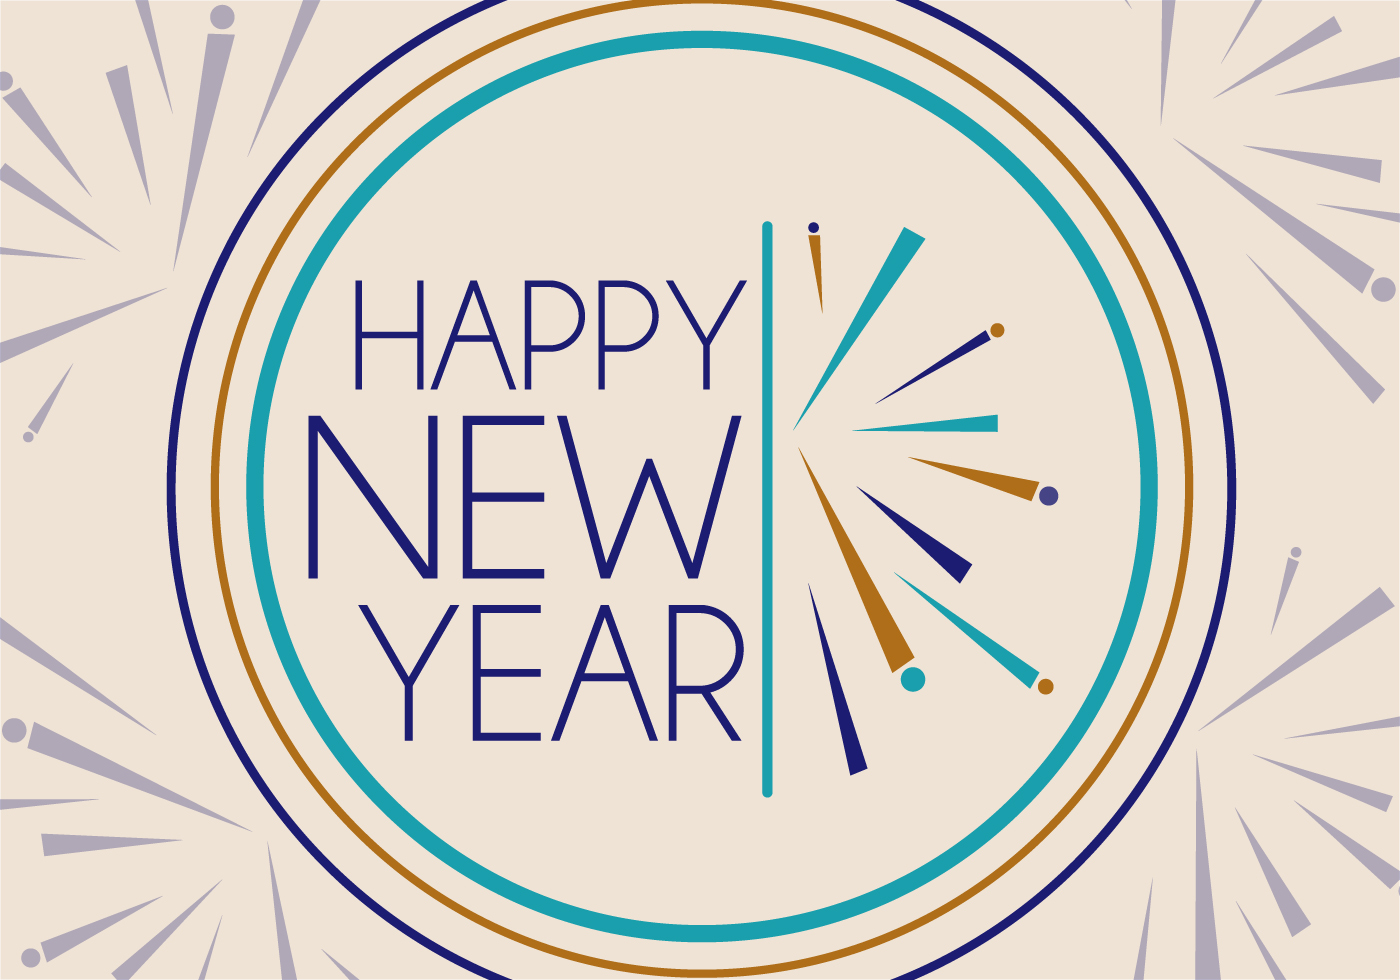 new year clipart free download - photo #41